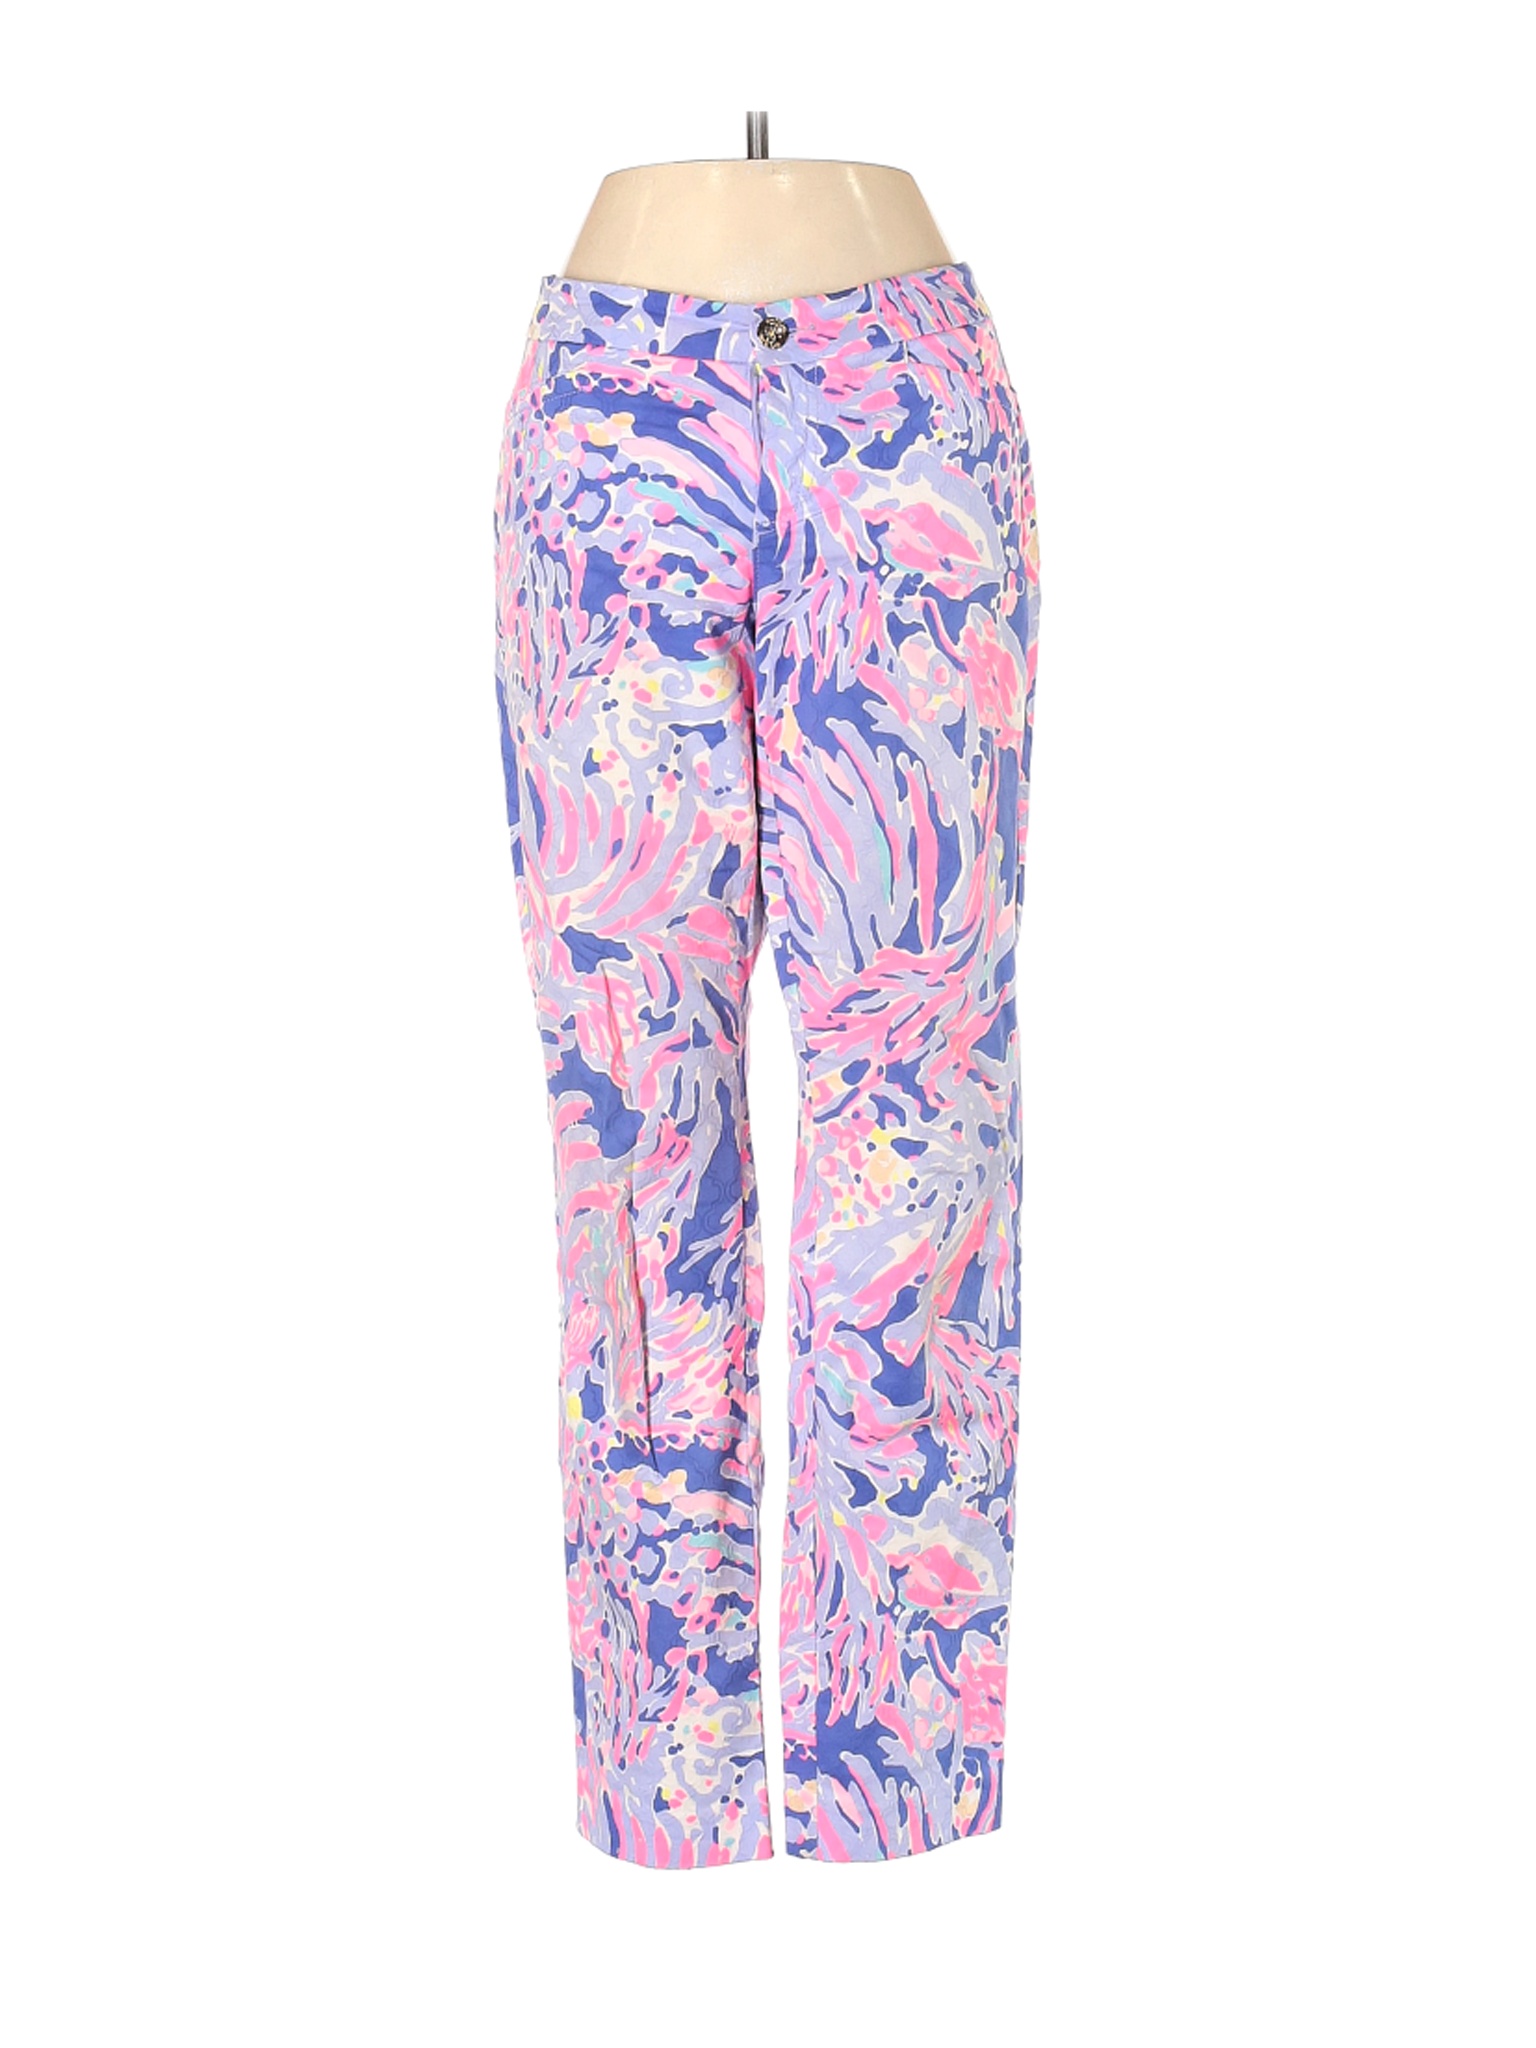 Lilly Pulitzer Women Pink Casual Pants 2 | eBay